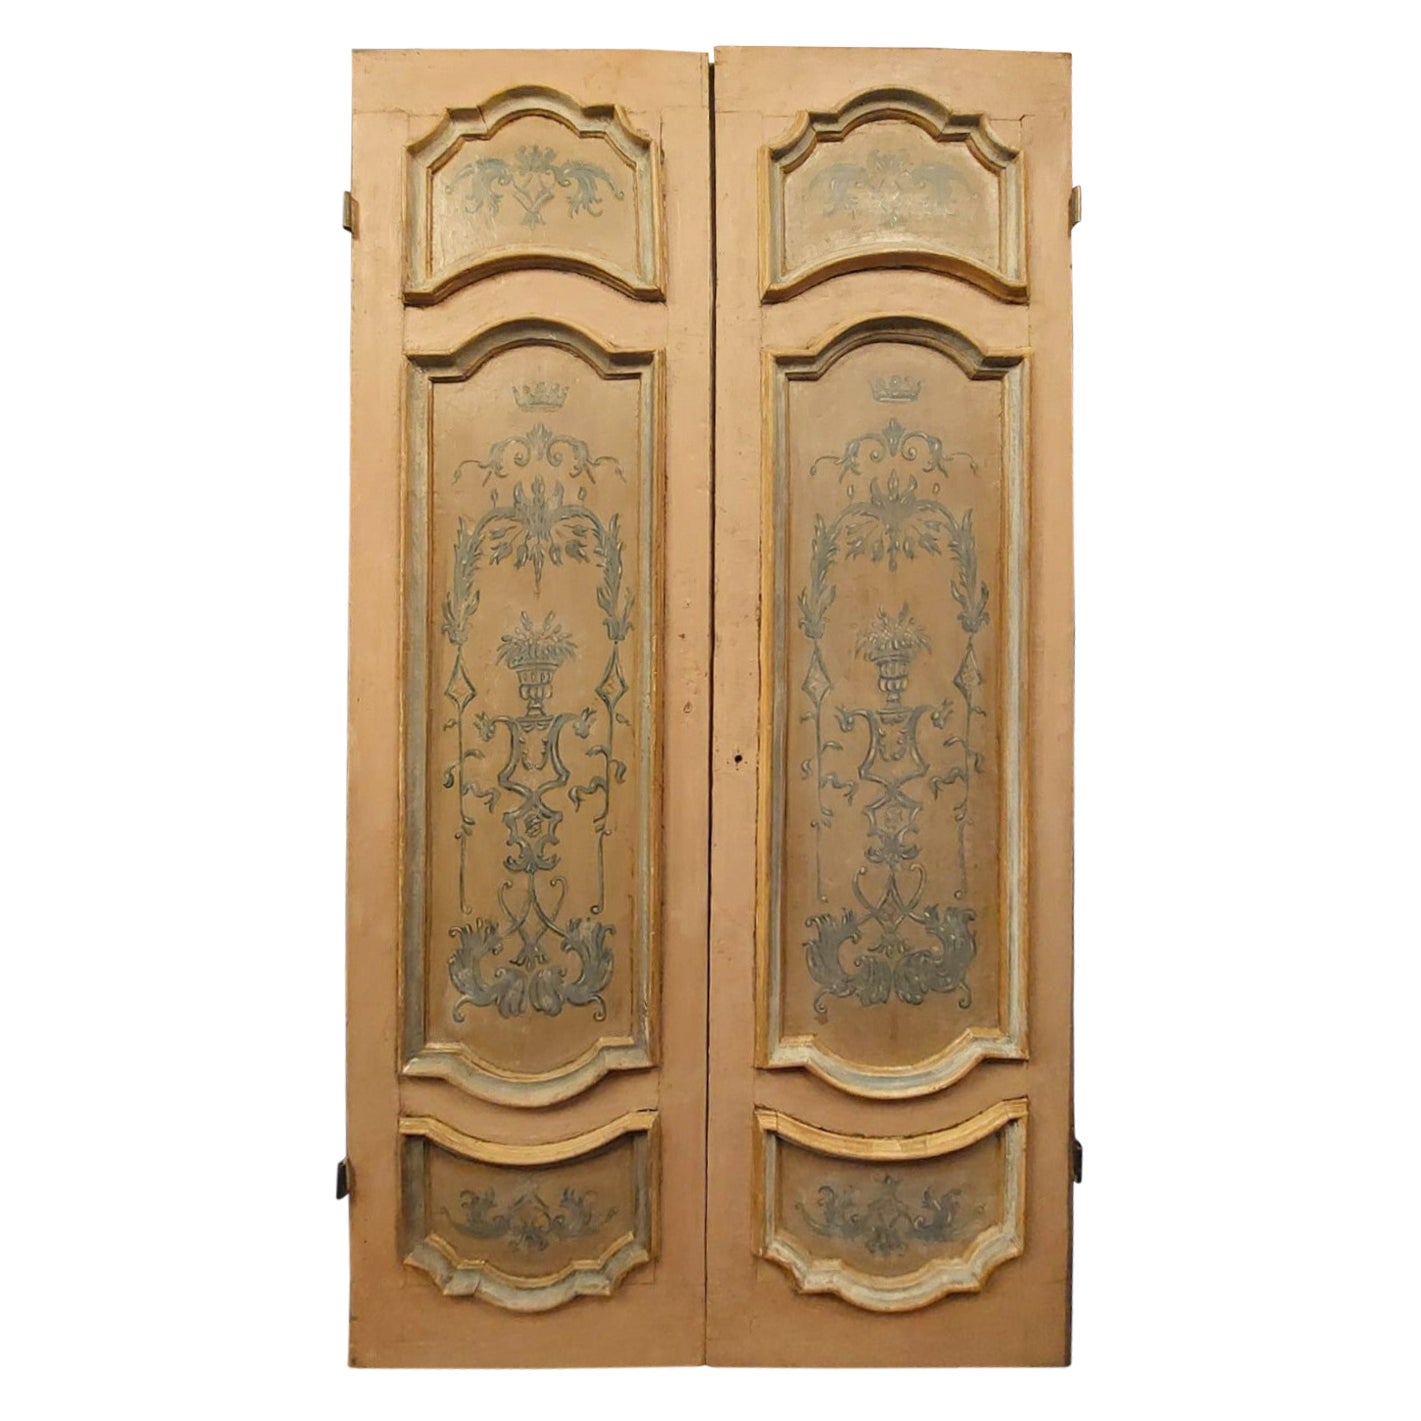 N.2 Lacquered and Painted Double-Leaf Doors, Yellow, 18th Century Rome, 'Italy' For Sale